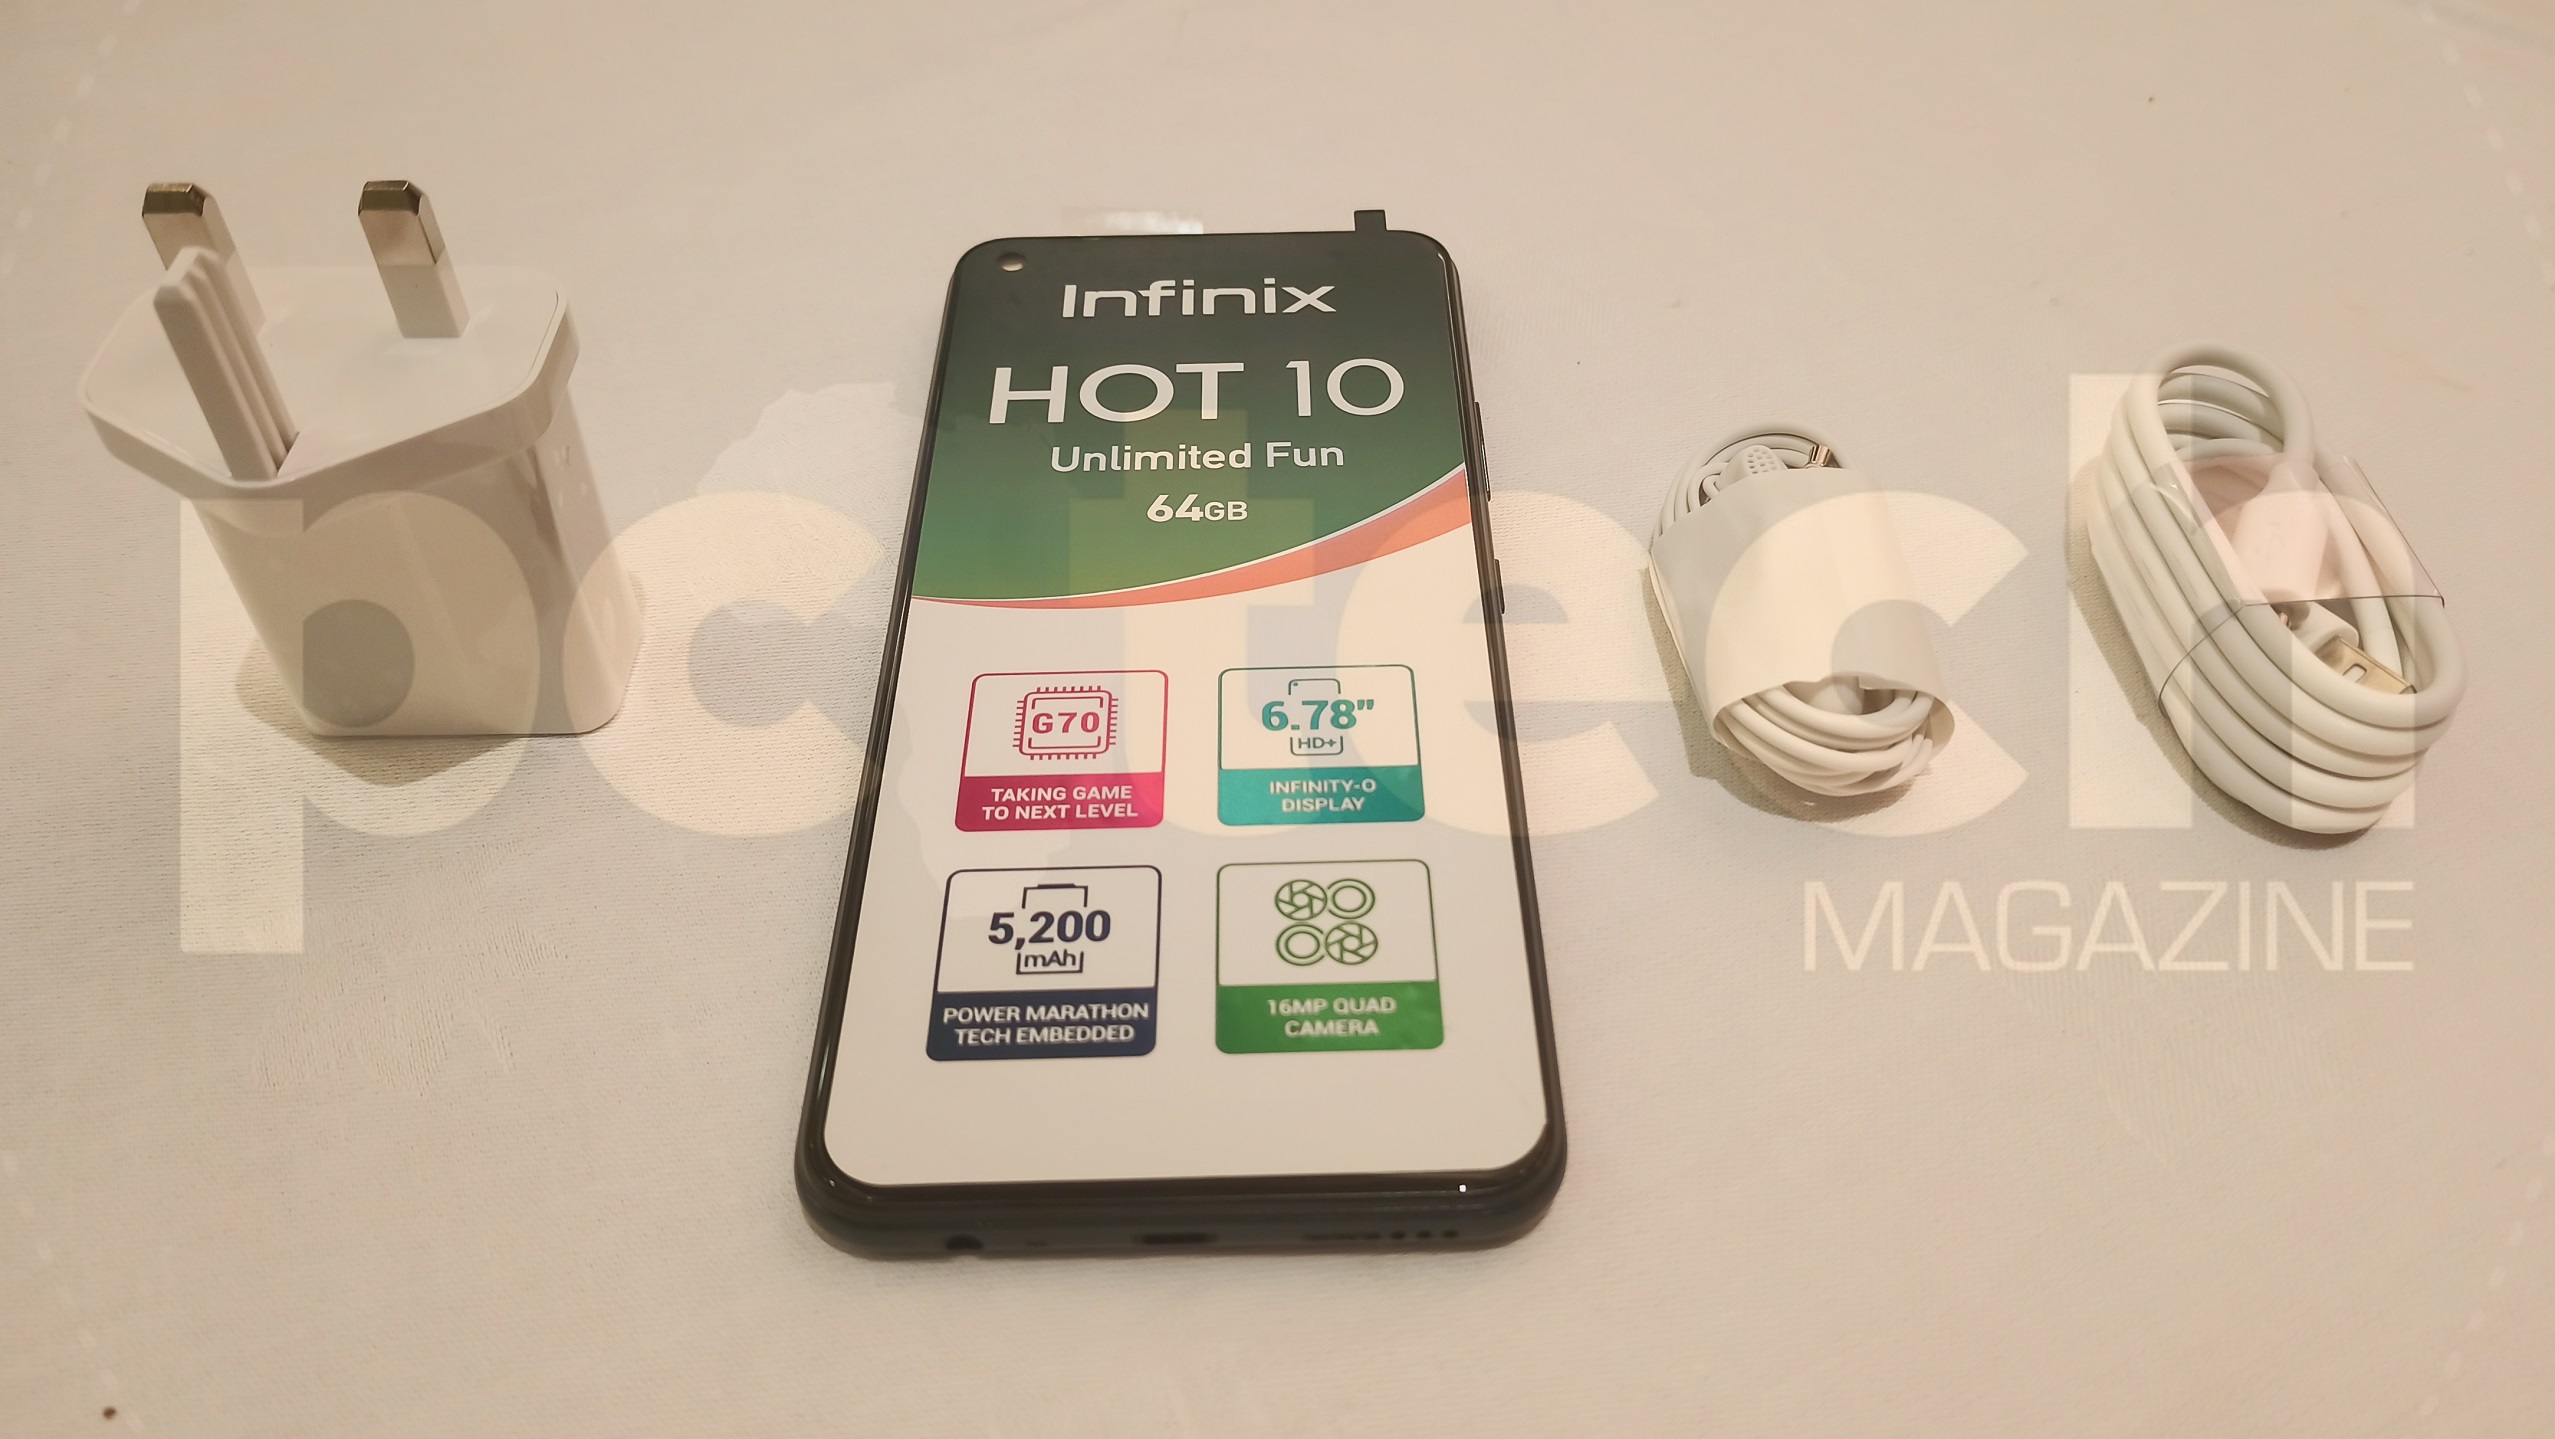 Unboxing you get the Infinix HOT 10, its accessories including; a charging brick, charging chord that does act like a transfer data cable, standard 3.5mm earphones. Photo by: Olupot Nathan Ernest | PC TECH MAGAZINE